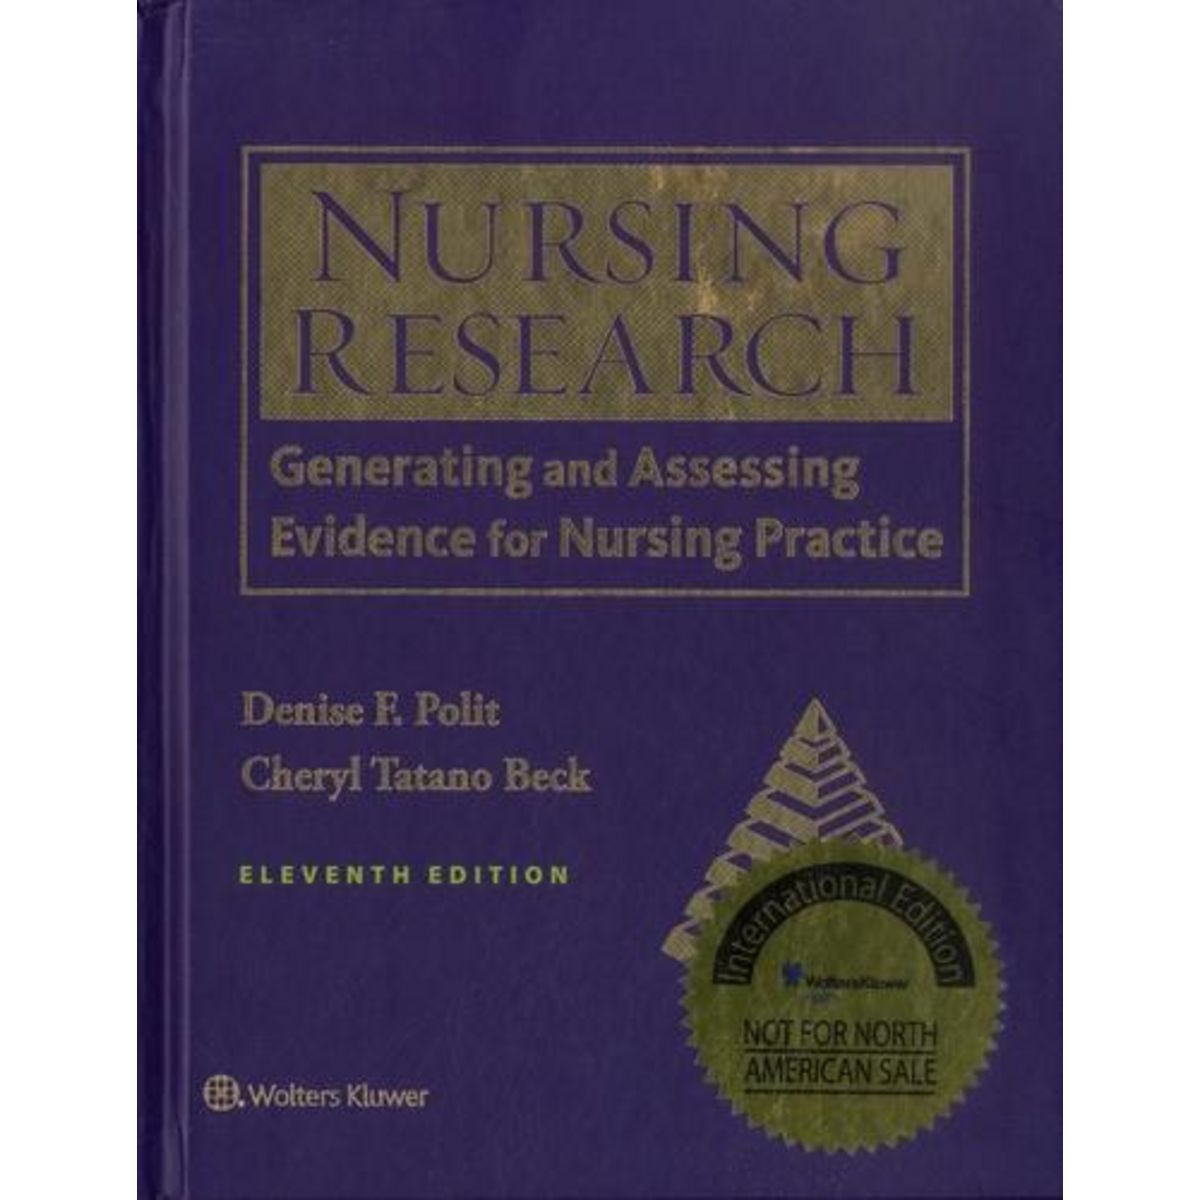 EVIDENCE　11TH　PRACTICE,　EDITION　Denise　Polit　F.　EN　GENERATING　EDITION,　cher　NURSING　FOR　ASSESSING　AND　RESEARCH.　pas　NURSING　ANGLAIS,